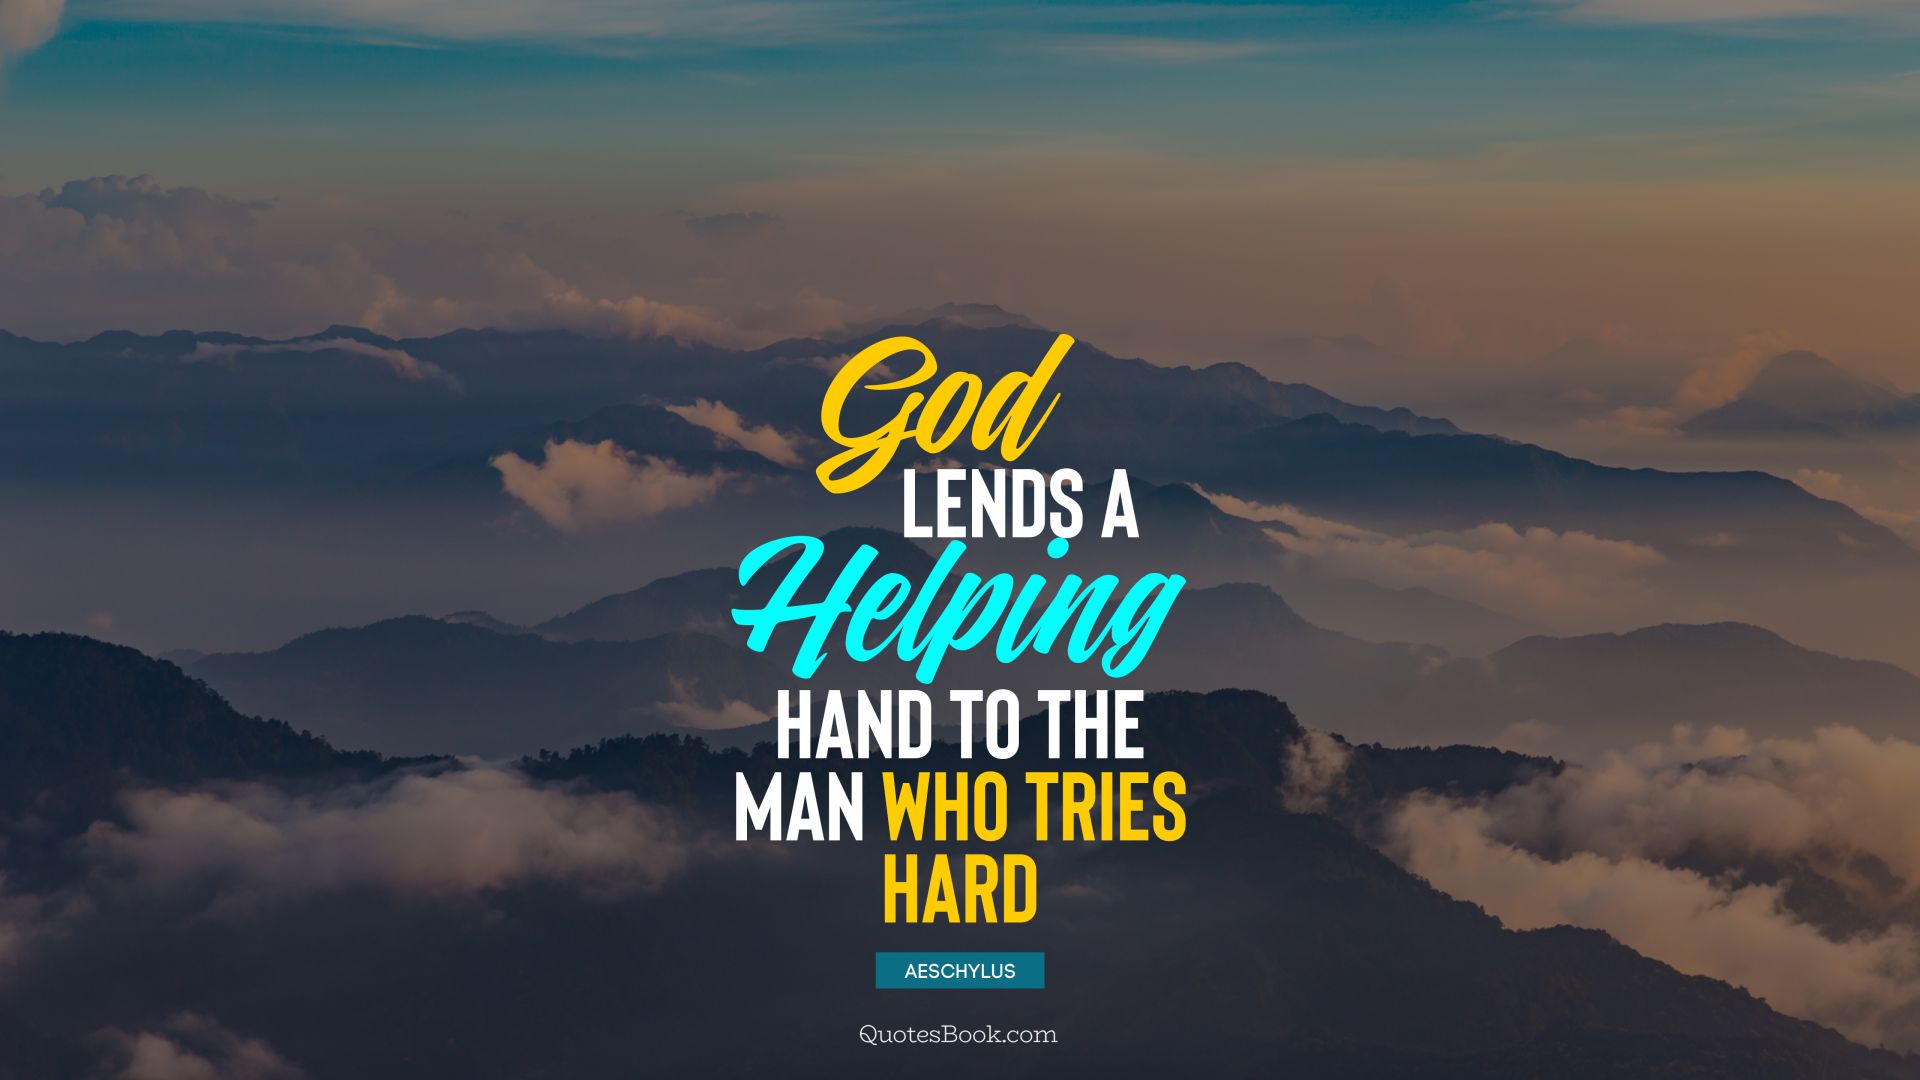 God lends a helping hand to the man who tries hard. - Quote by Aeschylus